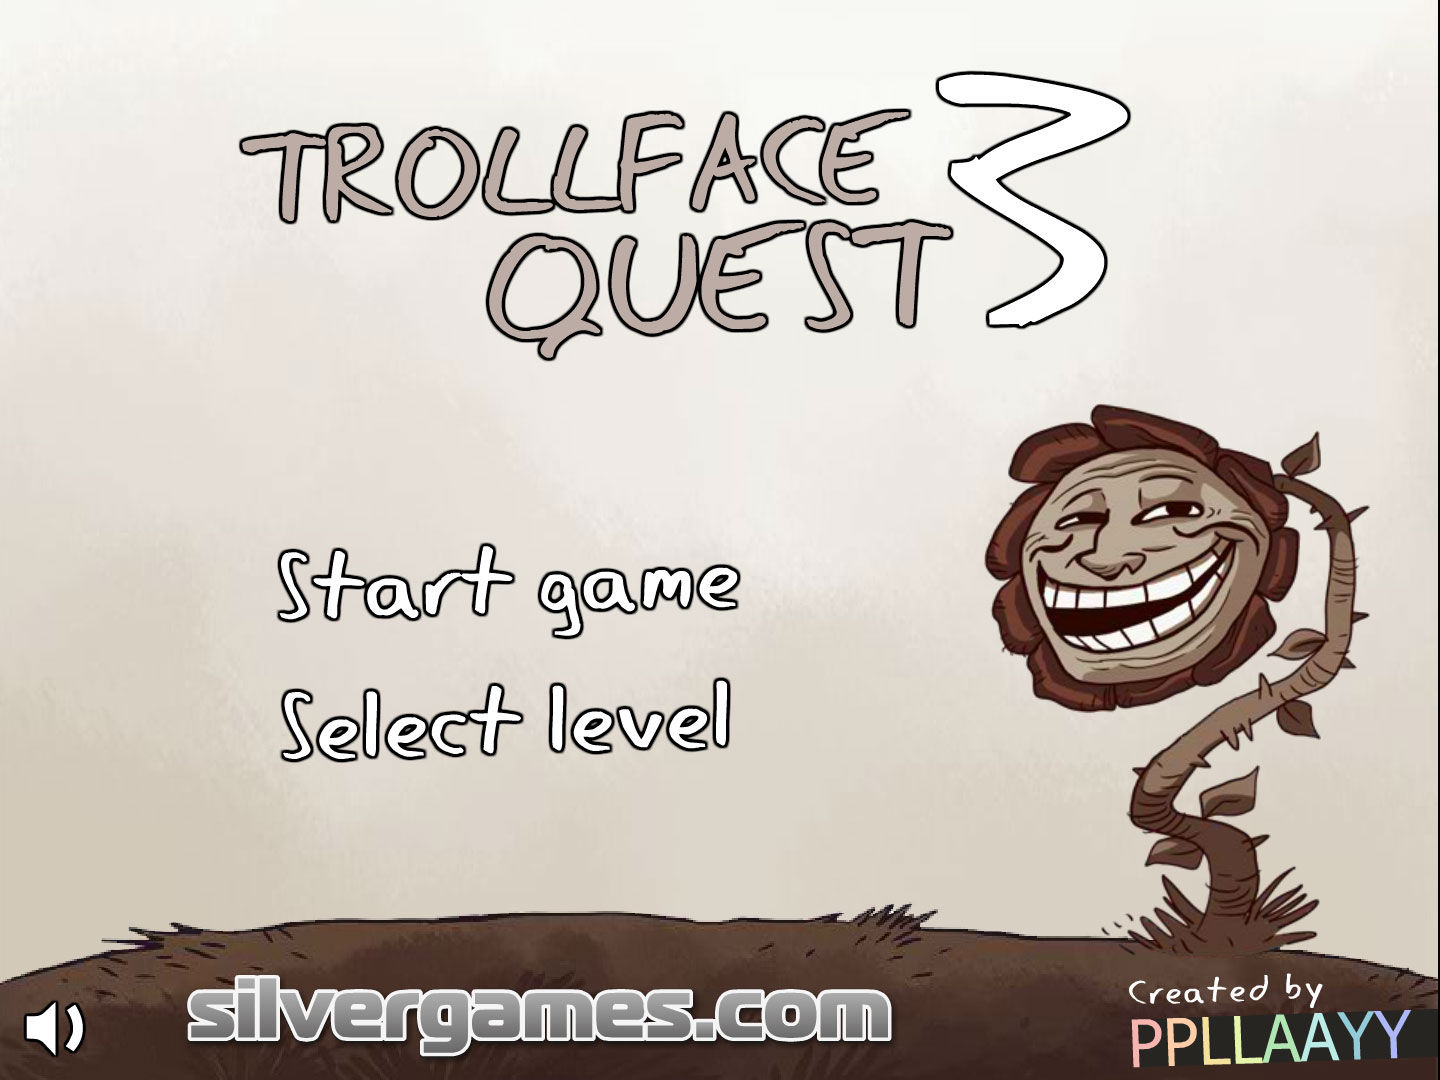 Троллфейс квест 3. Троллфейс. Trollface игра. Игра троллфейс квест 3. Troll face Quest.